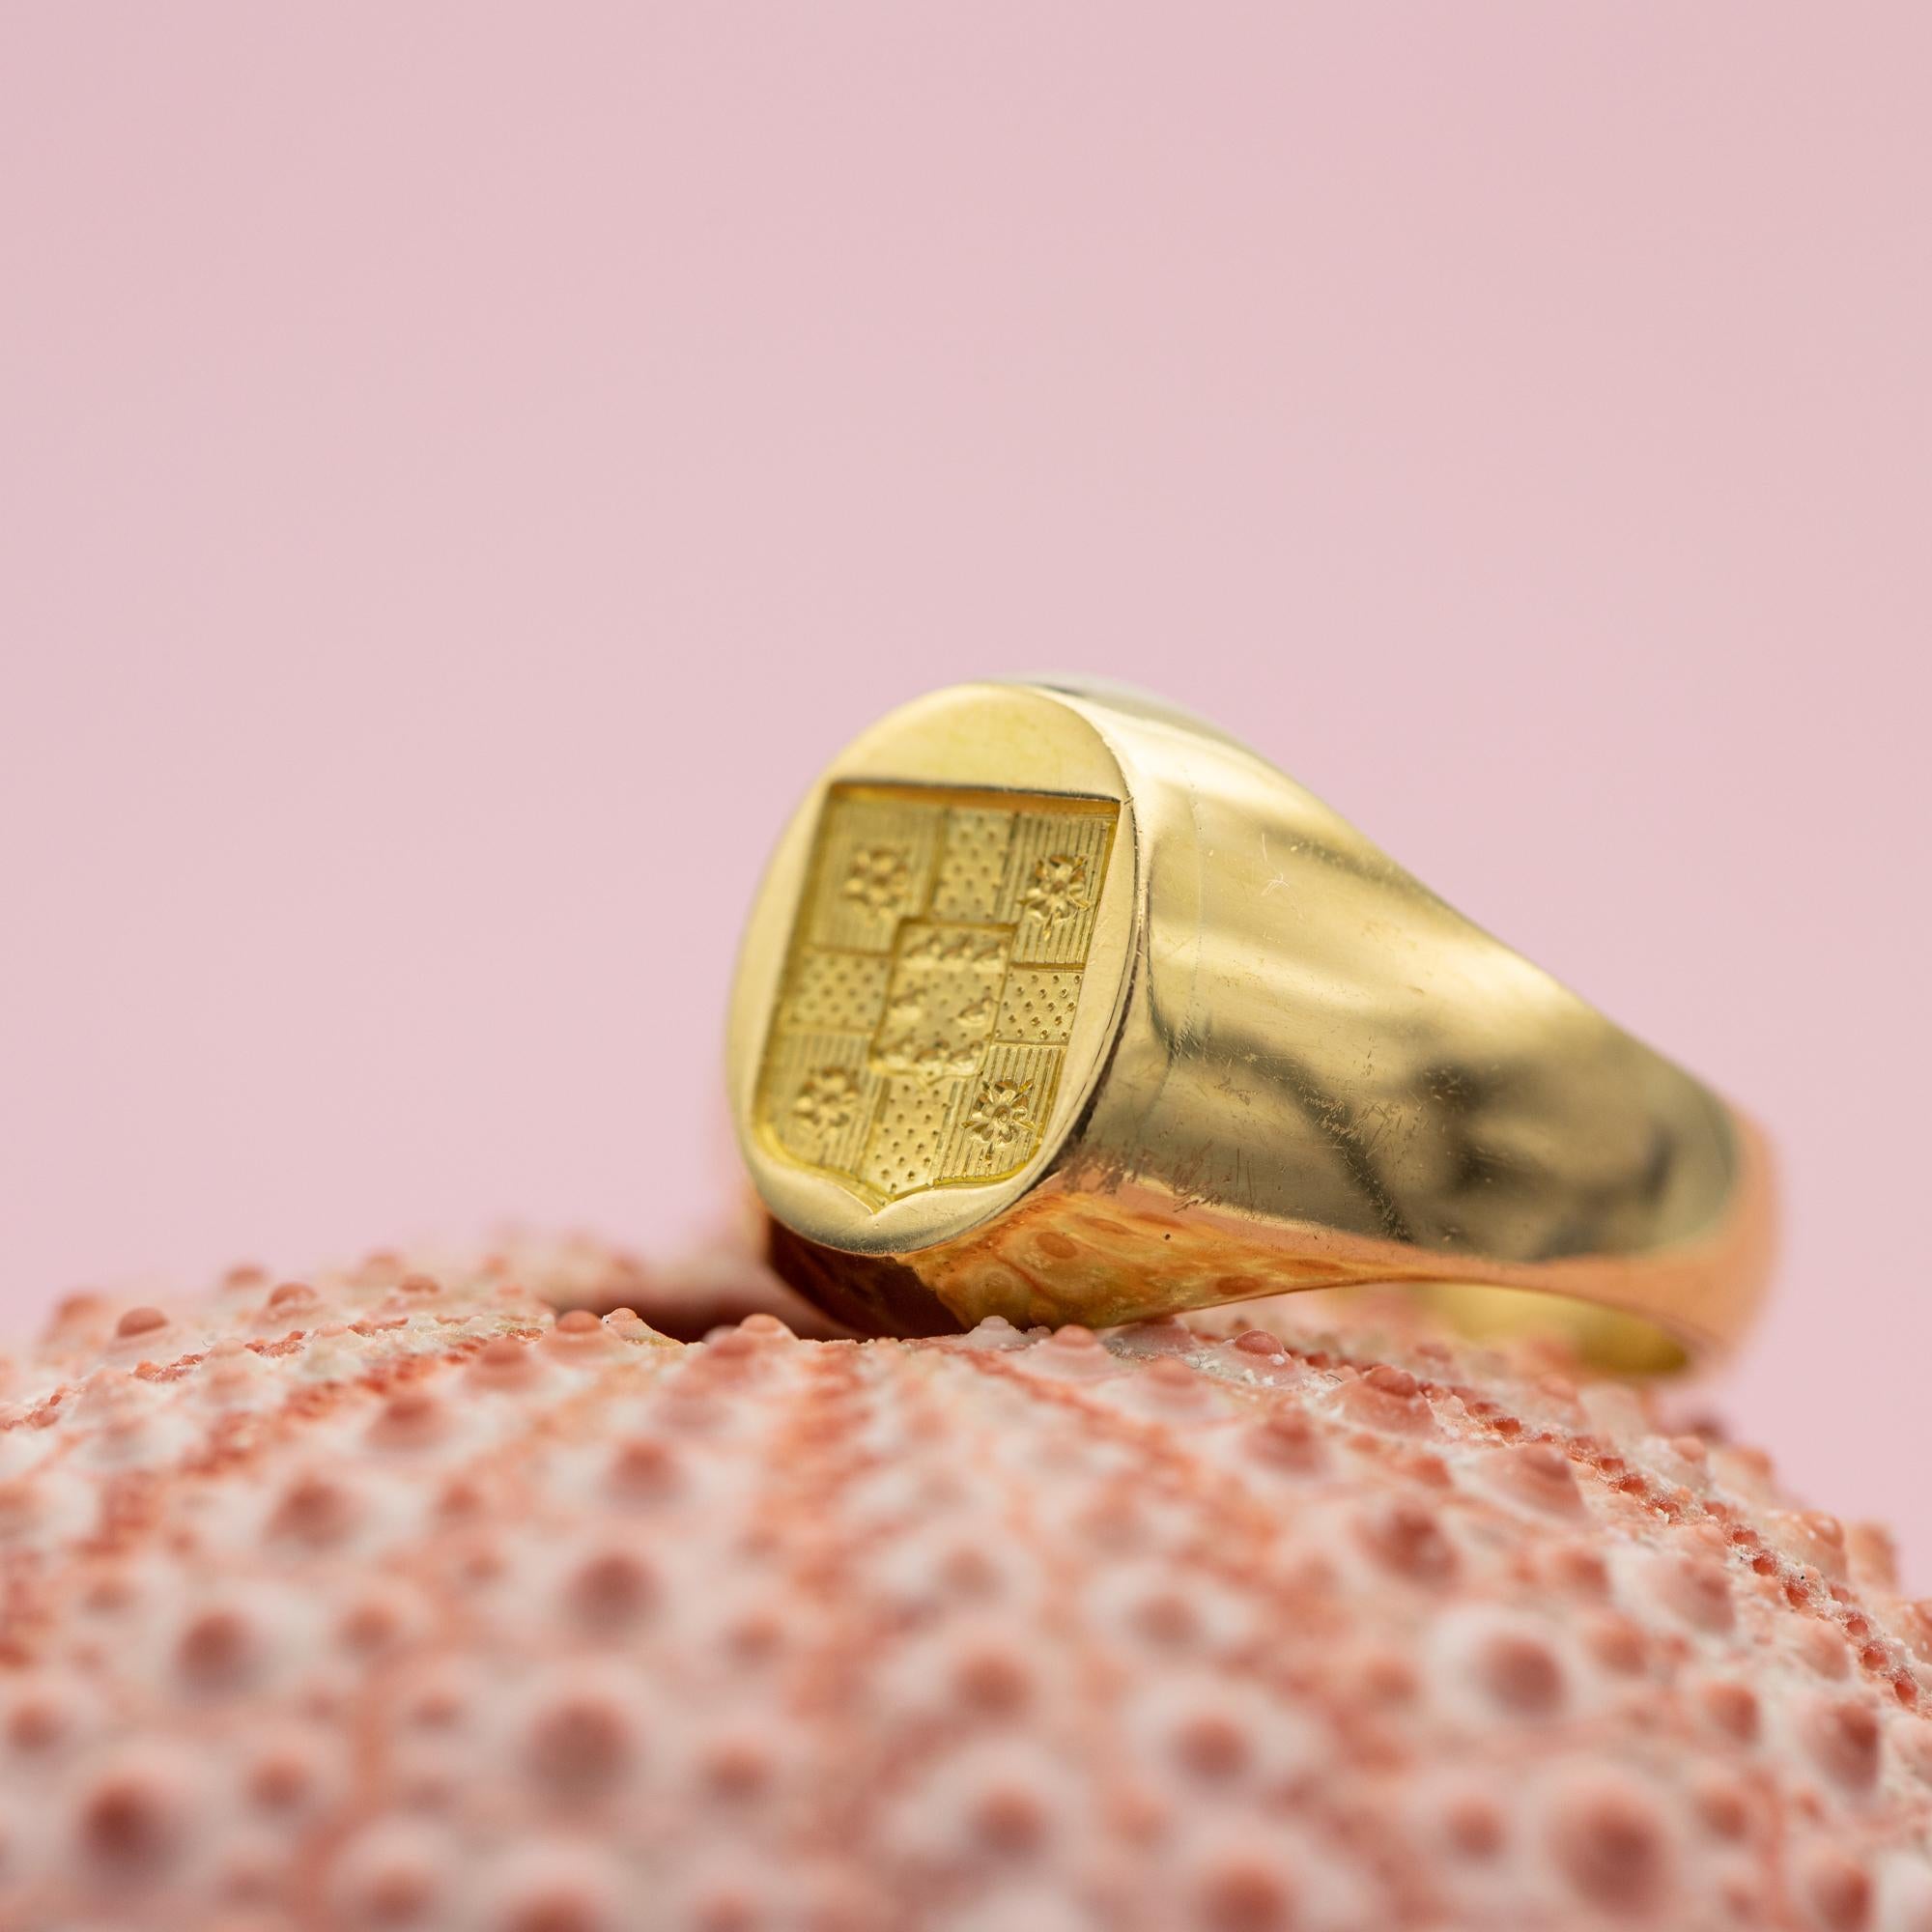 Napoleon III 18K French heavy signet ring - Intaglio ring - Patina solid gold gentleman ring